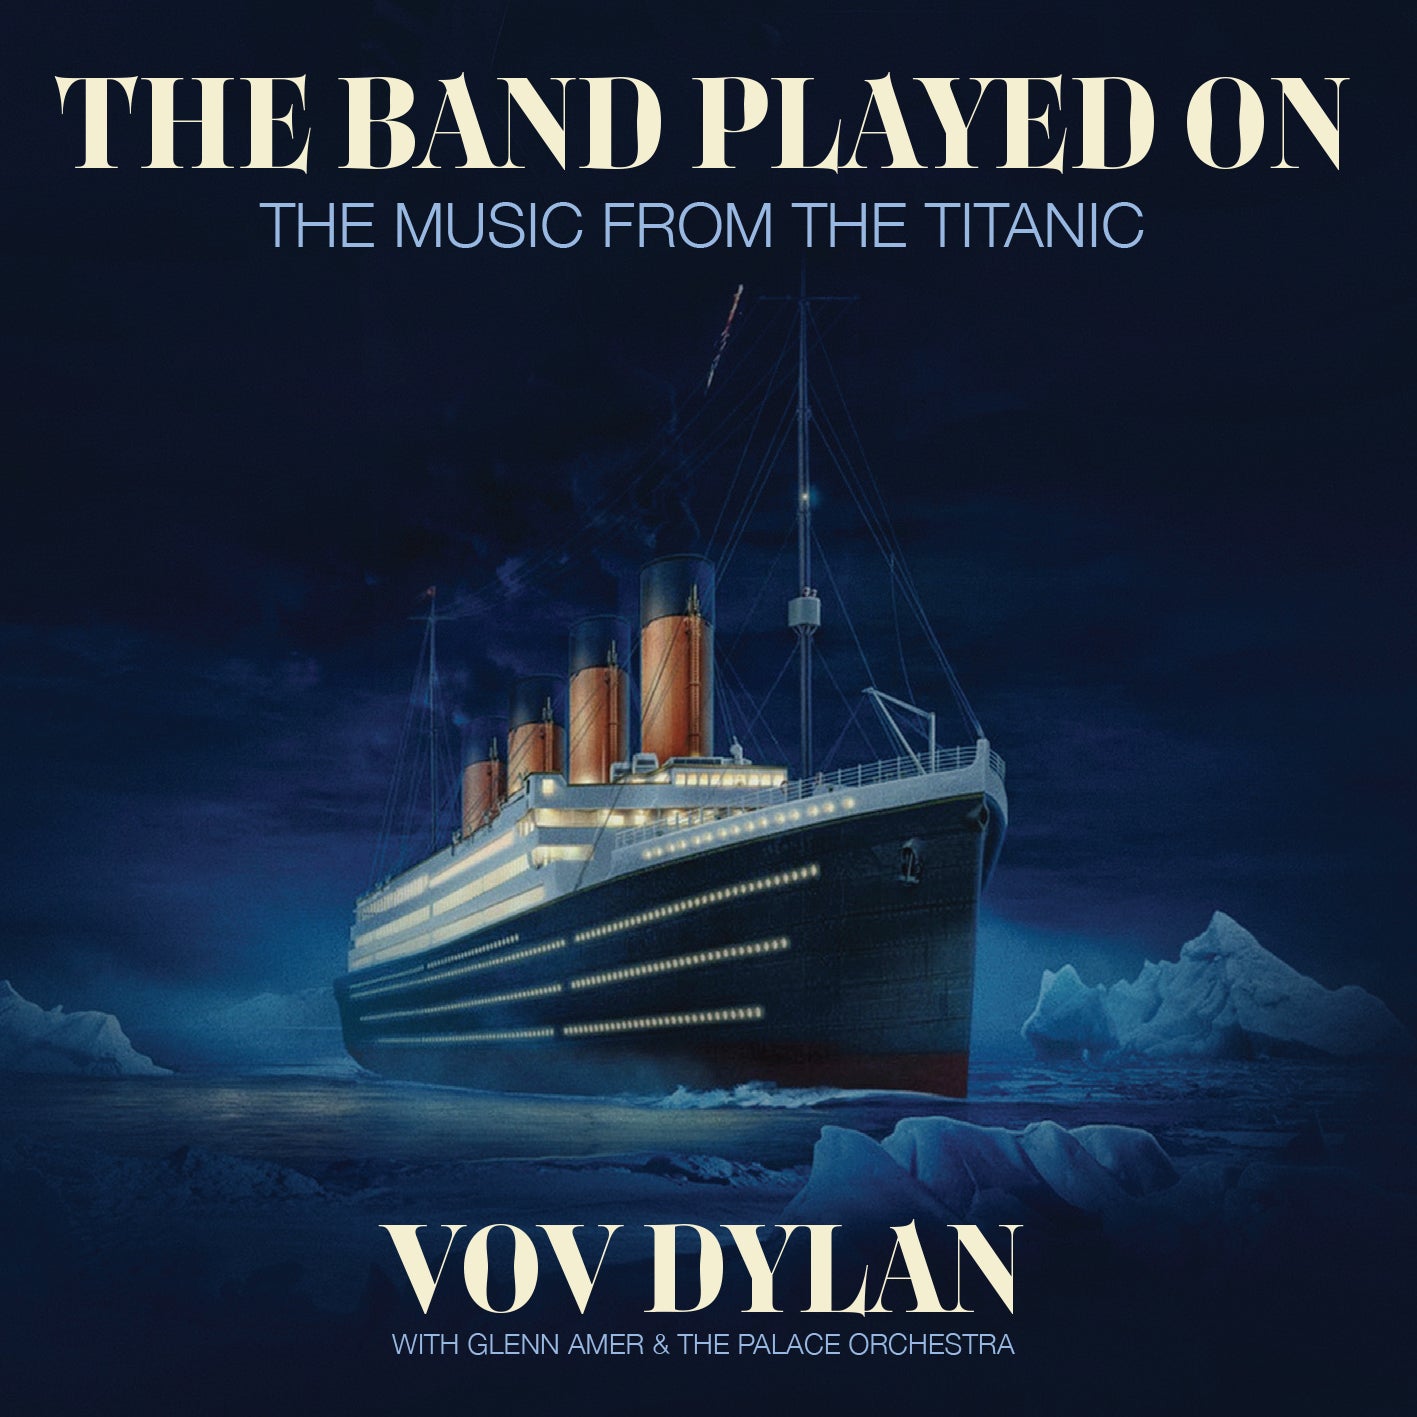 VOV DYLAN - THE BAND PLAYED ON